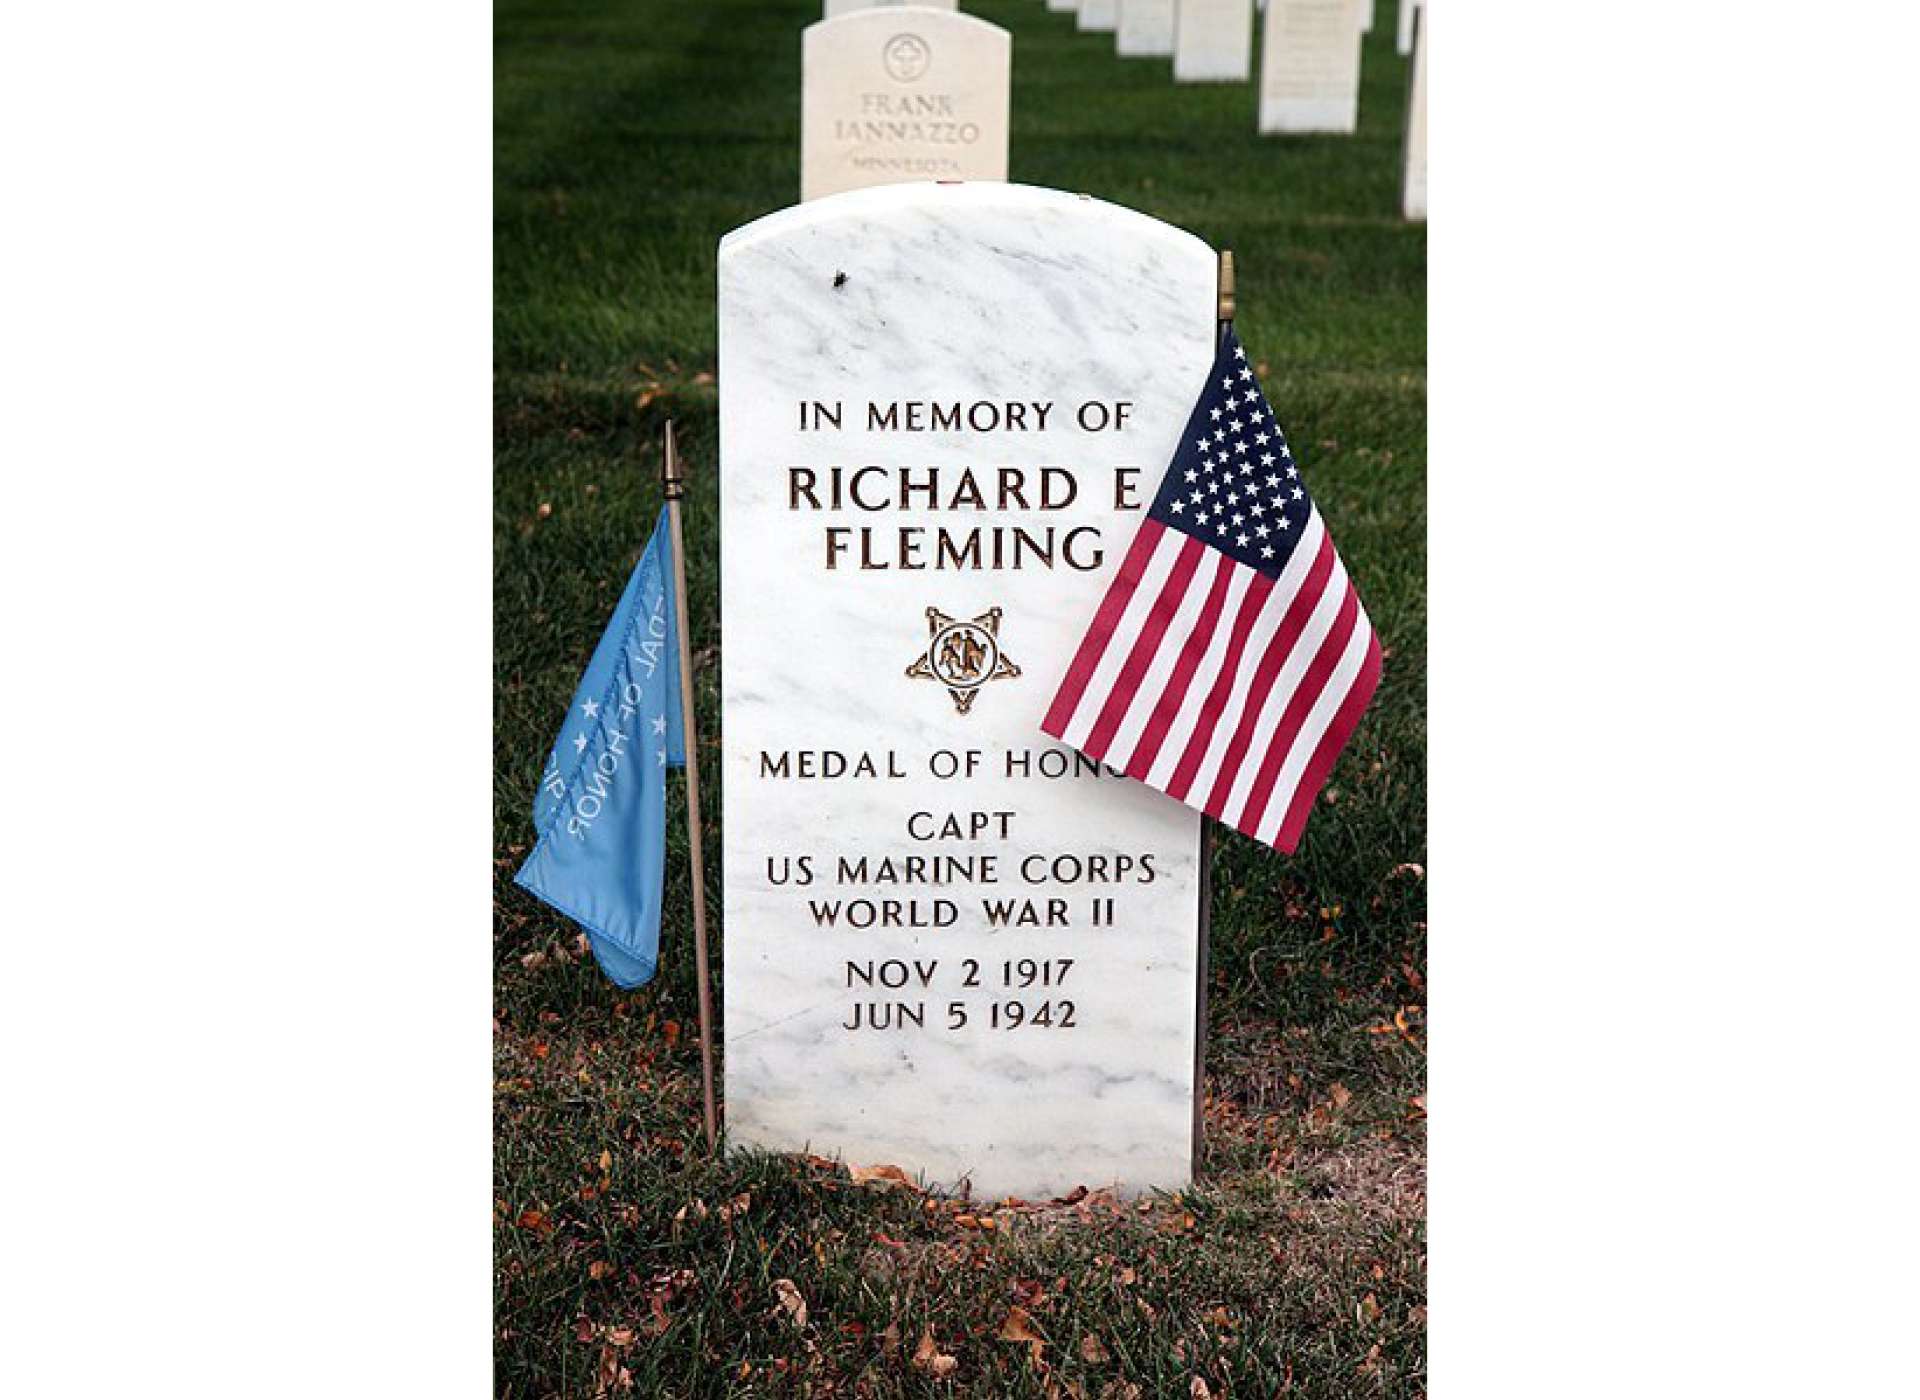 Captain Richard Fleming’s headstone at Fort Snelling National Cemetery. Copyright TimothyMN, licensed under the Creative Commons Attribution-Share Alike 4.0 International license.